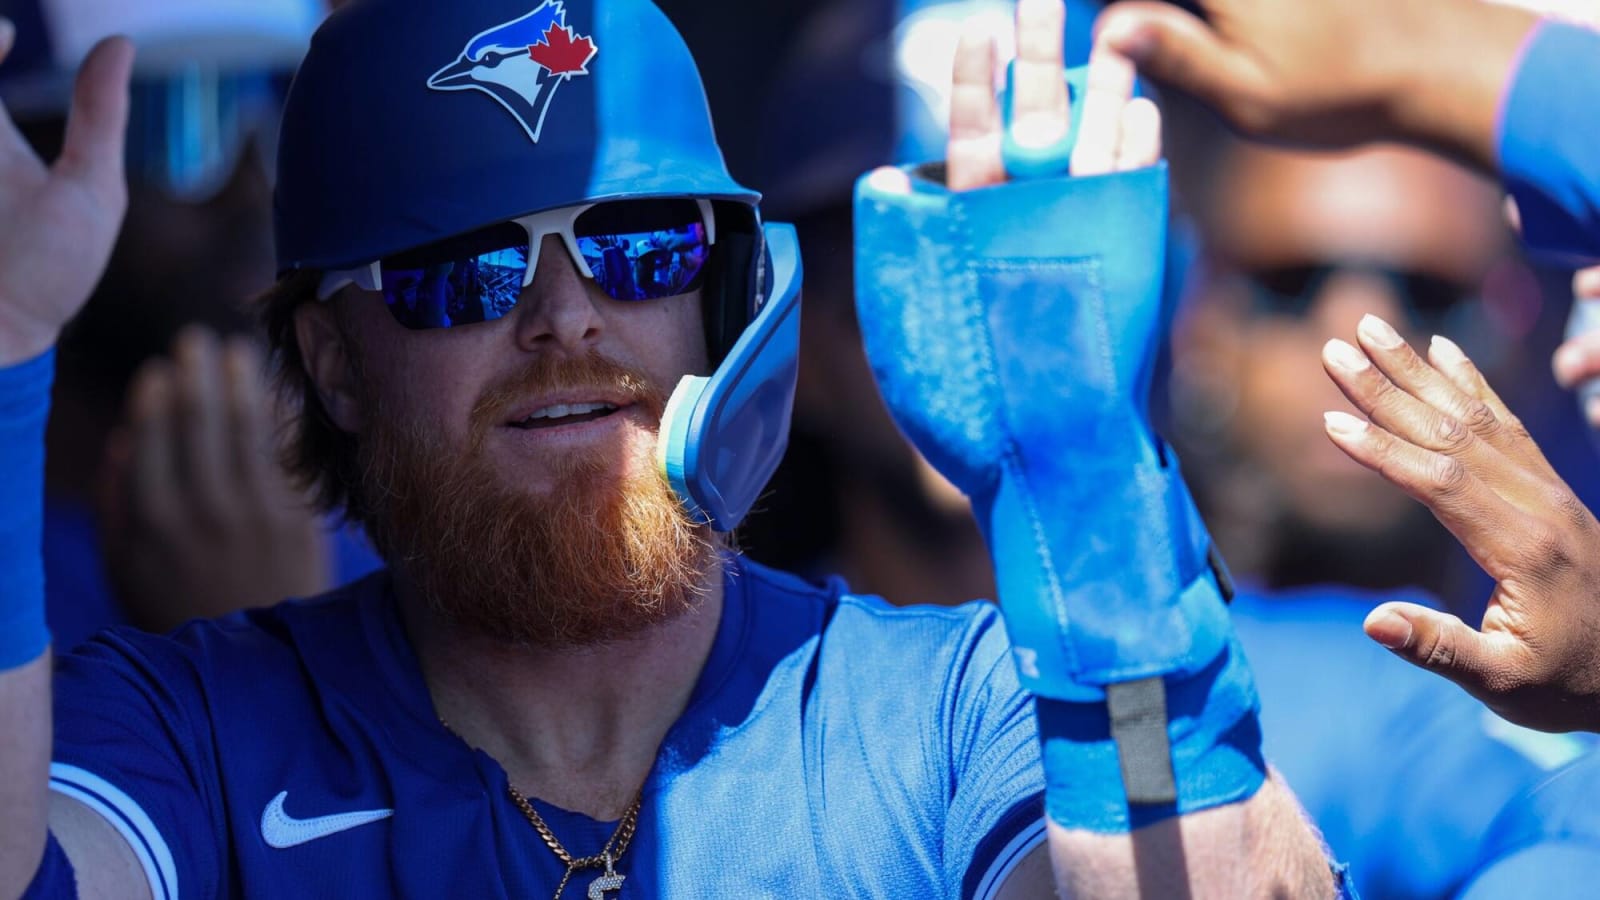 Chad Dallas shines, Nate Pearson lit up, Justin Turner drives in a run, and more as Blue Jays open Grapefruit League with 14-13 loss to Phillies